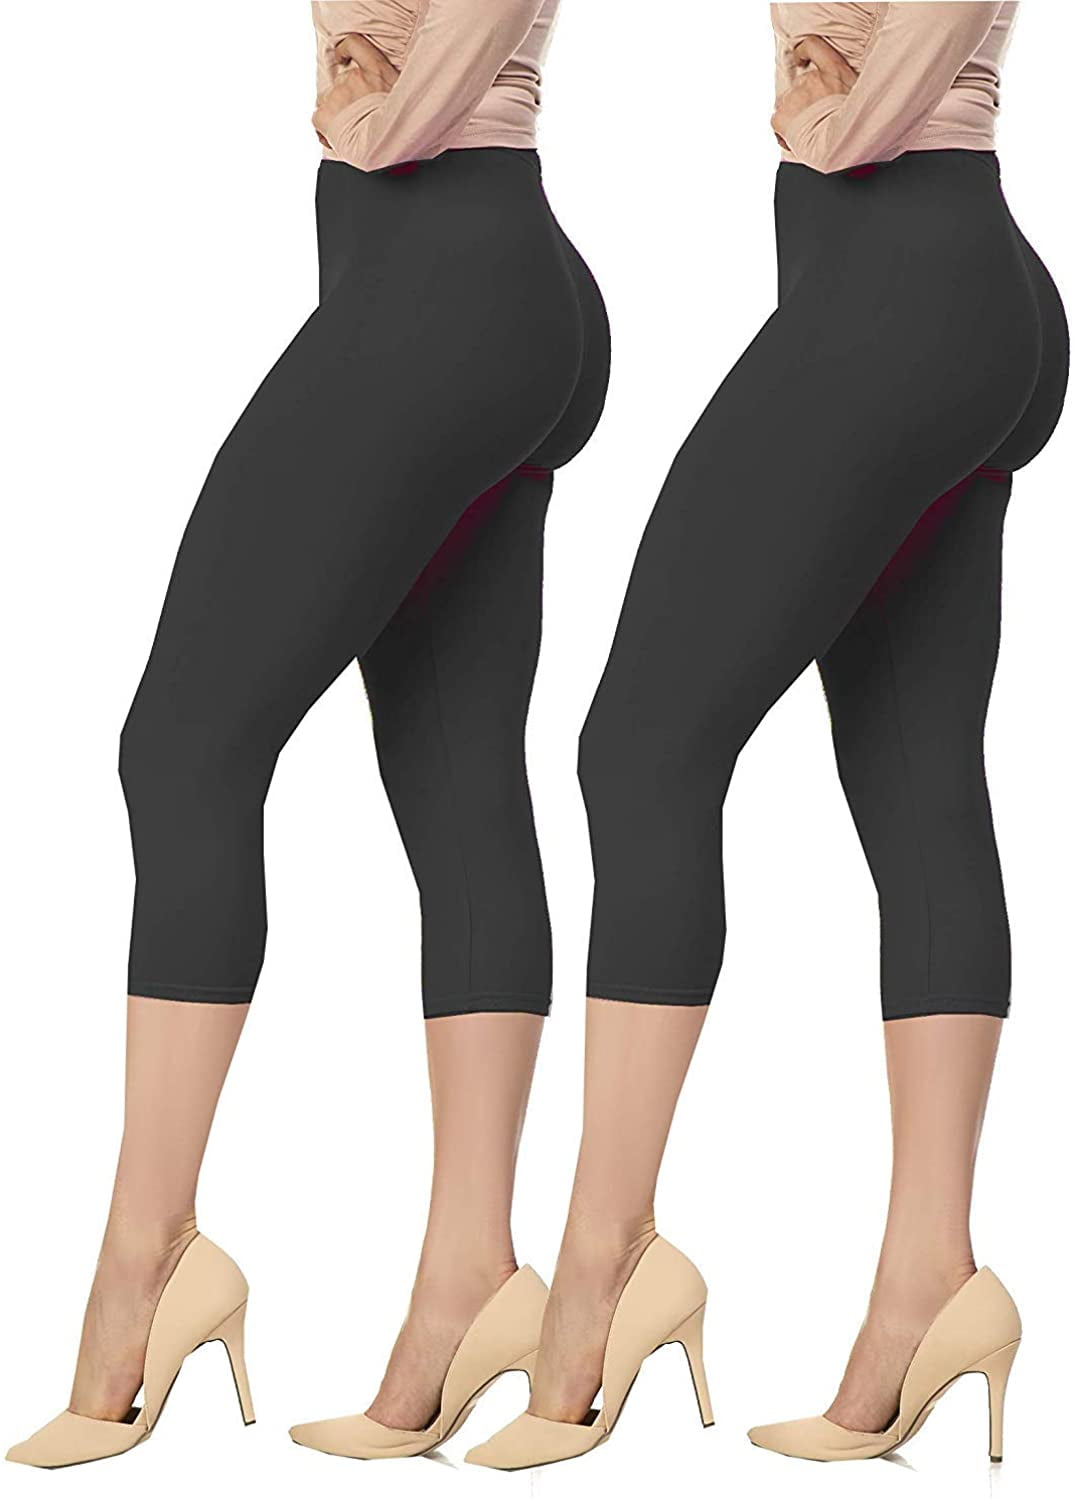 CTHH 2 Pack Leggings for Women Tummy Control-High Waisted Non See Through  Capri Black Soft Workout Yoga Pants